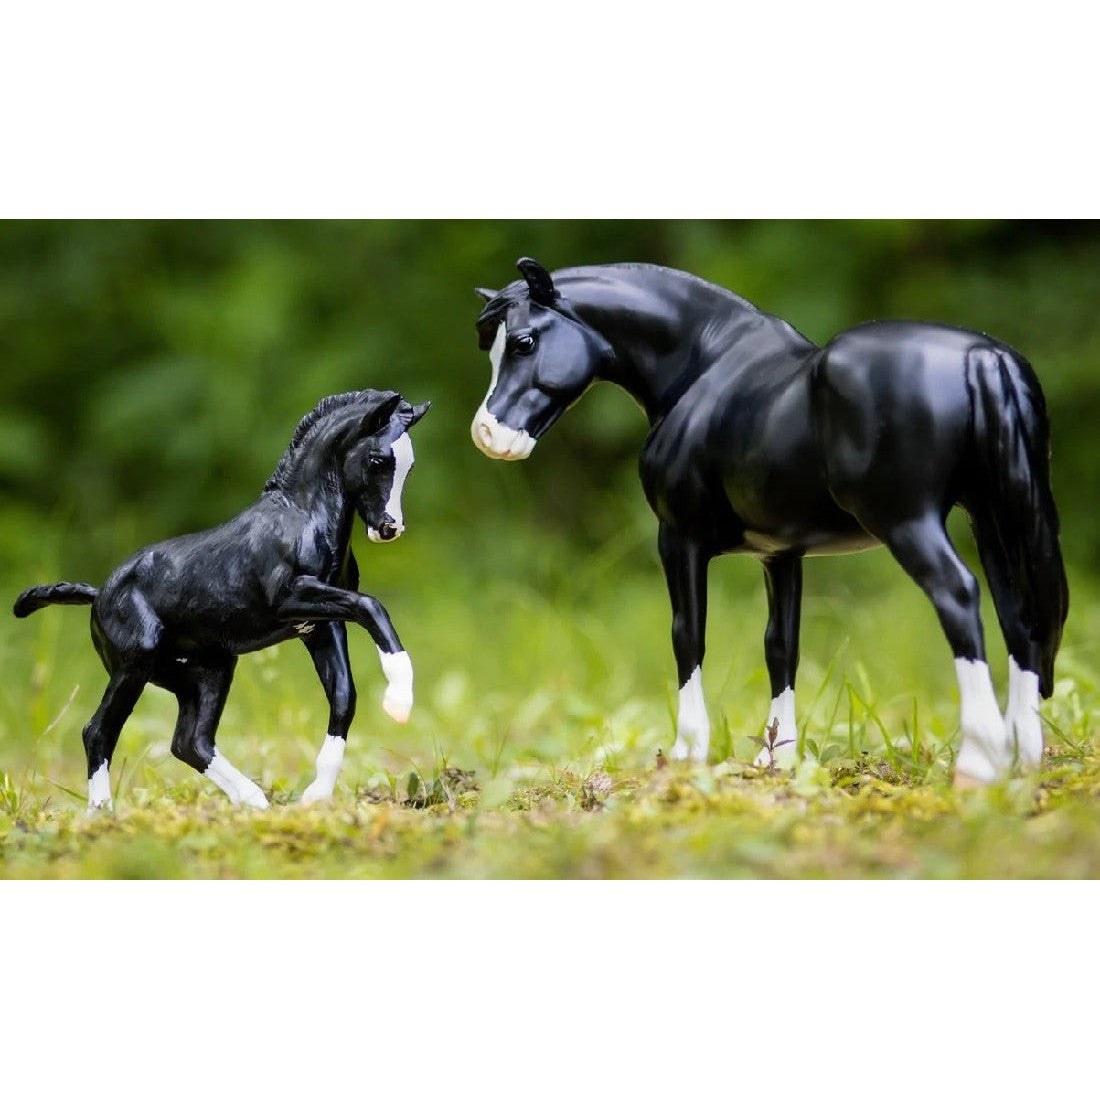 Black Breyer Horse Toys mare and foal in naturalistic outdoor setting.